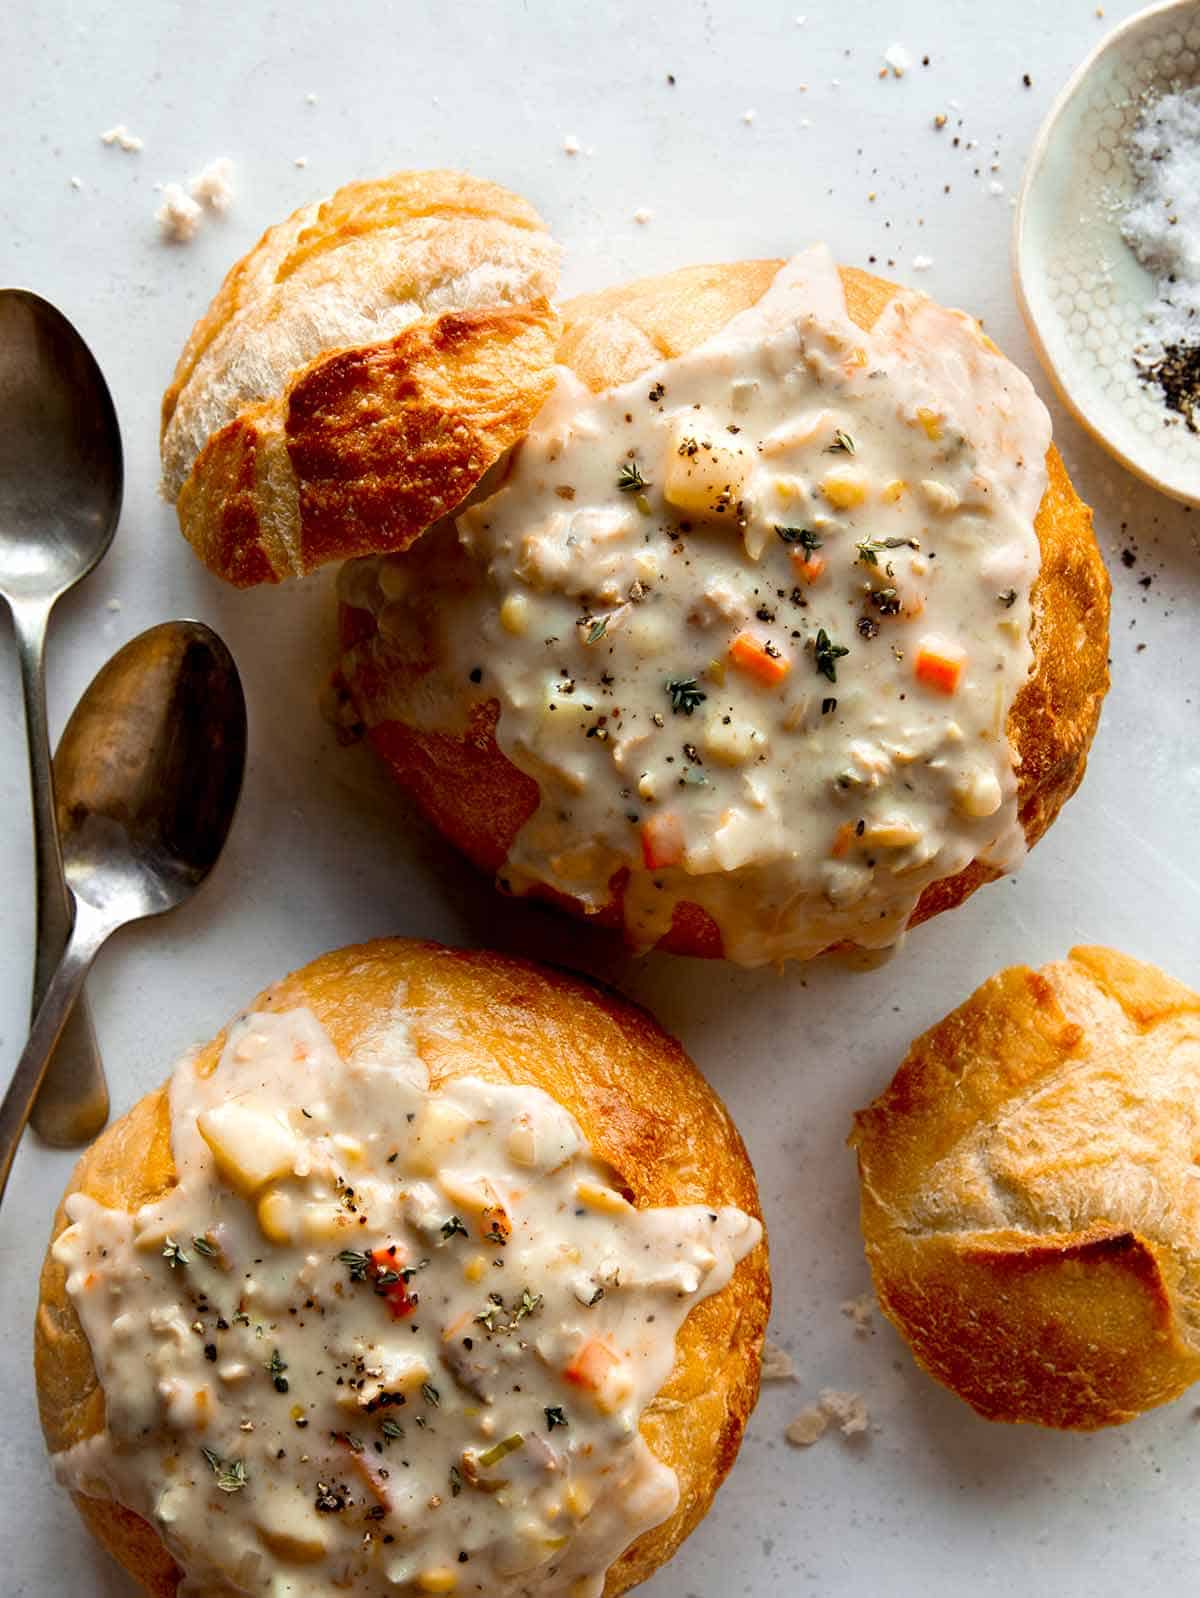 Clam chowder in two bread bowls.